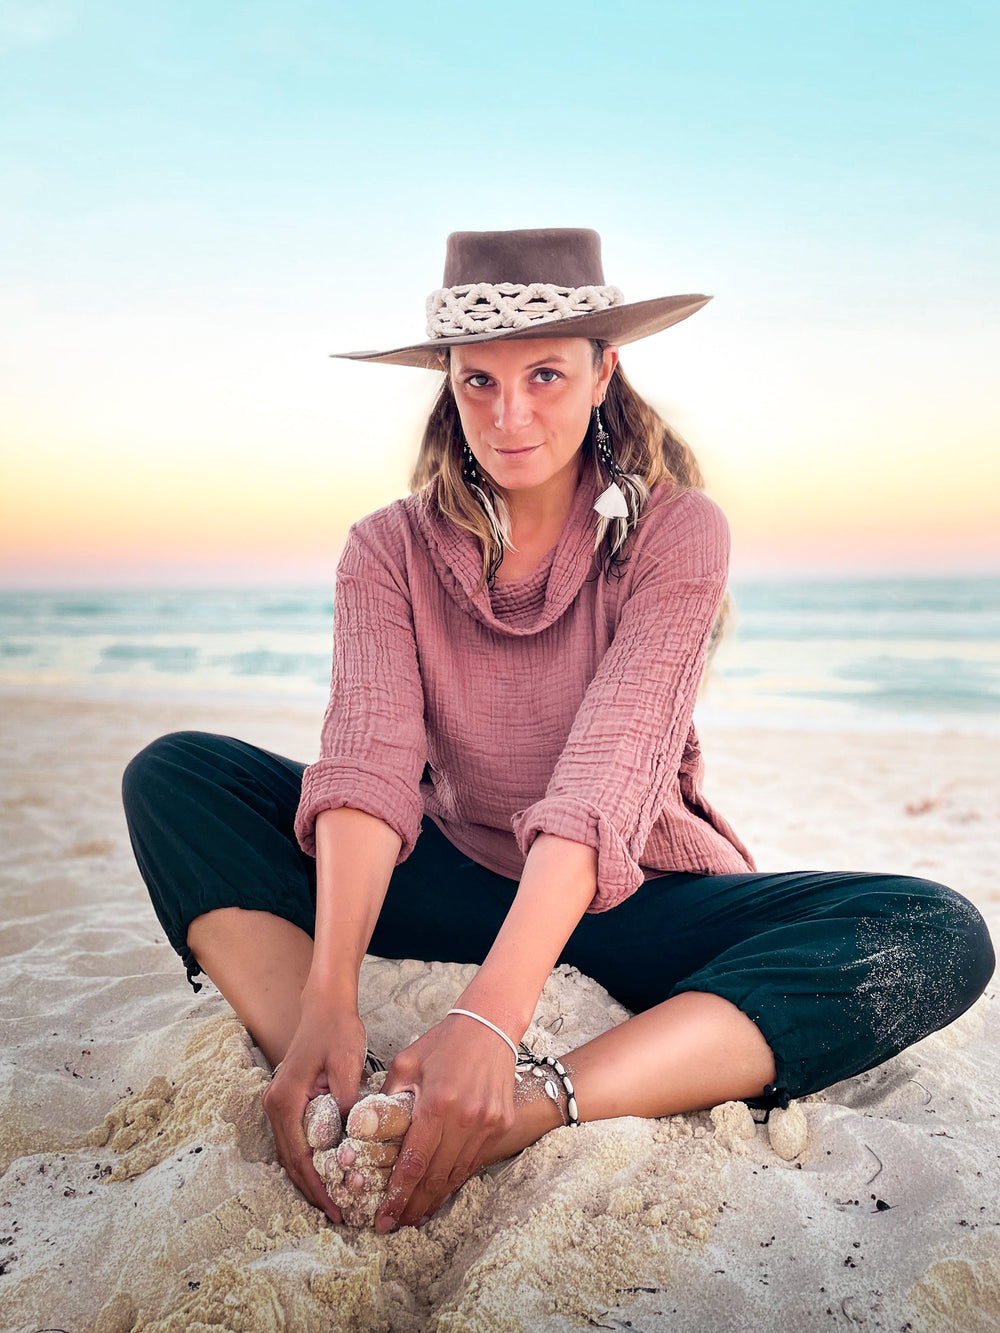 Female model is clothed in pink shirt with long sleeves and navy leggings. She sits on a sandy beach with ocean in behind her.